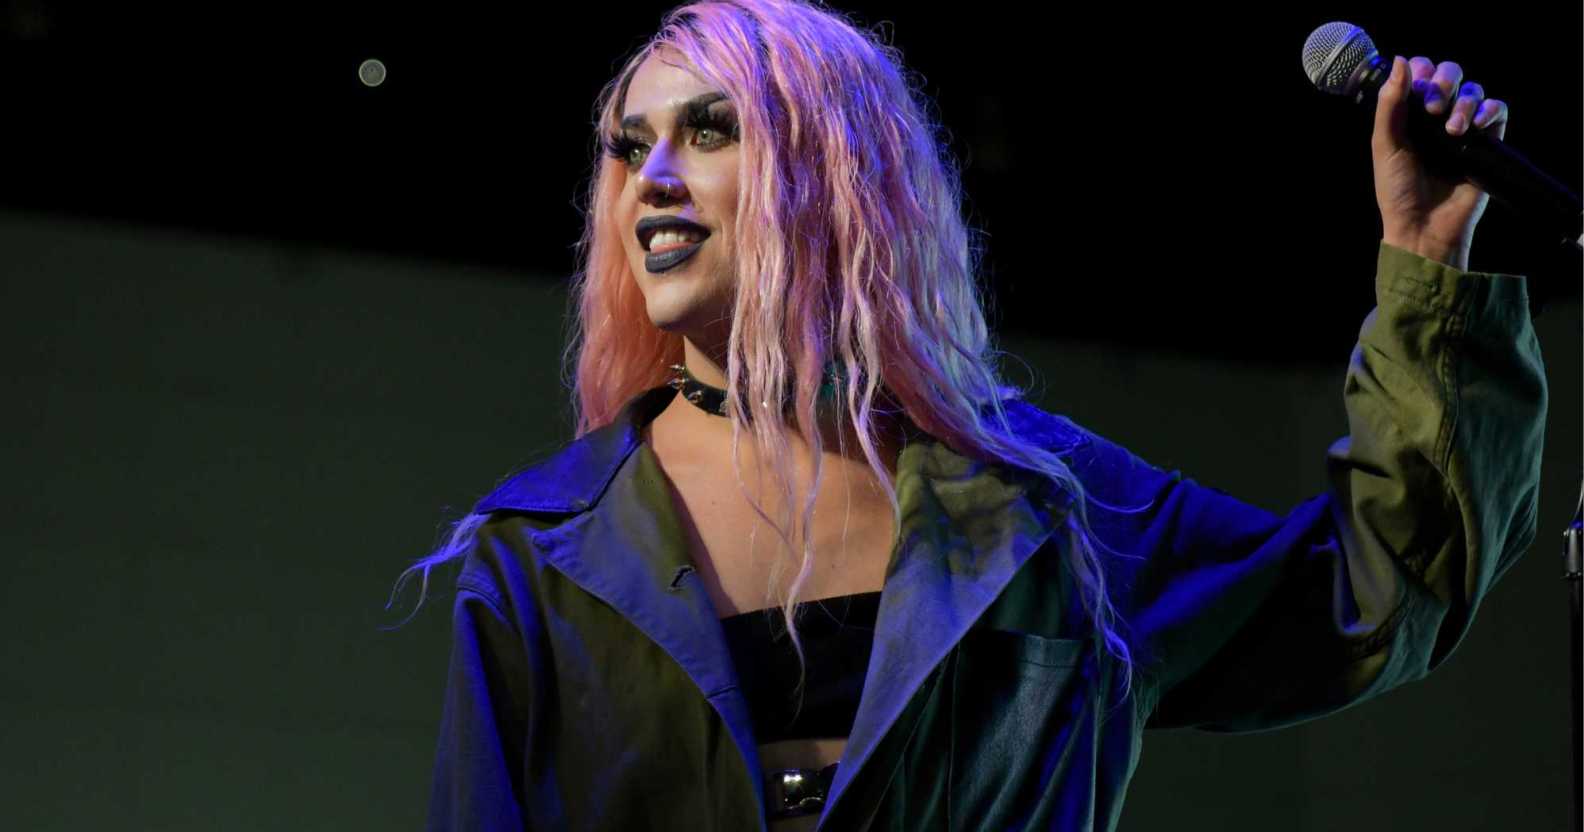 Screenshot of drag queen Adore Delano wearing a black bra top and grey overcoat with pink wig while she holds a microphone